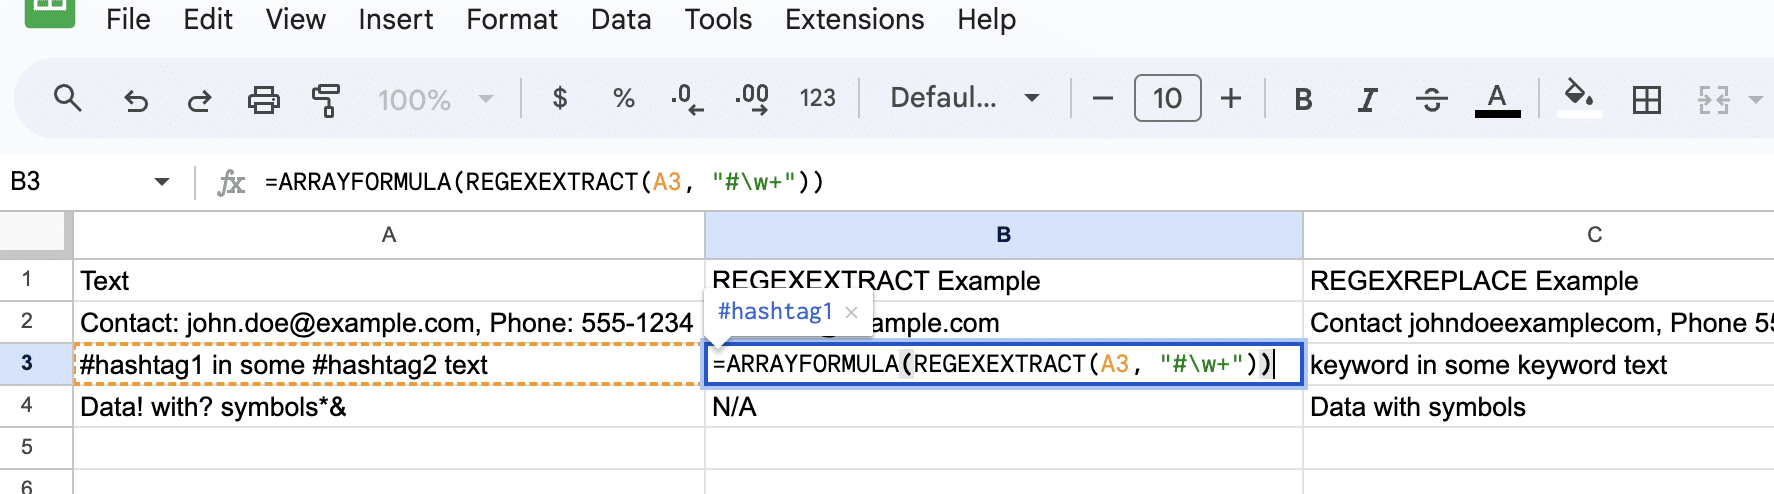 Extracting multiple hashtags from text using ARRAYFORMULA and REGEXEXTRACT in Google Sheets